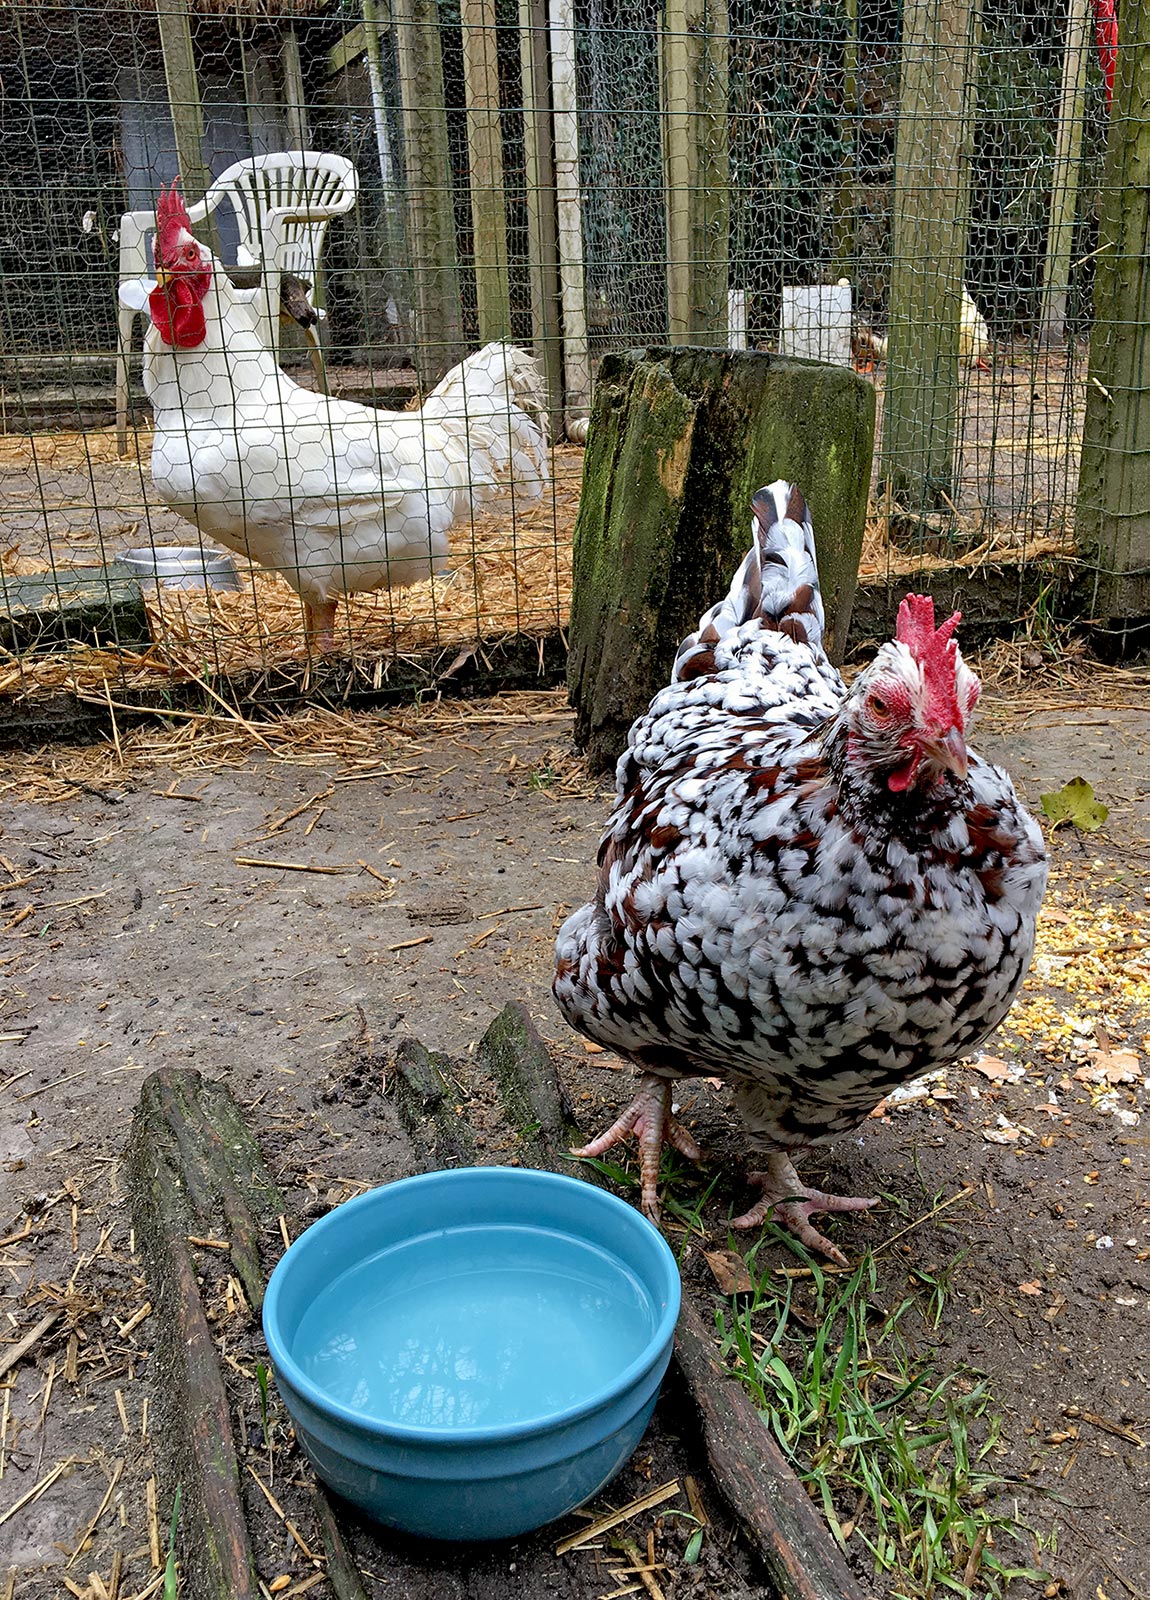 Princess with rooster Chicklett in the background